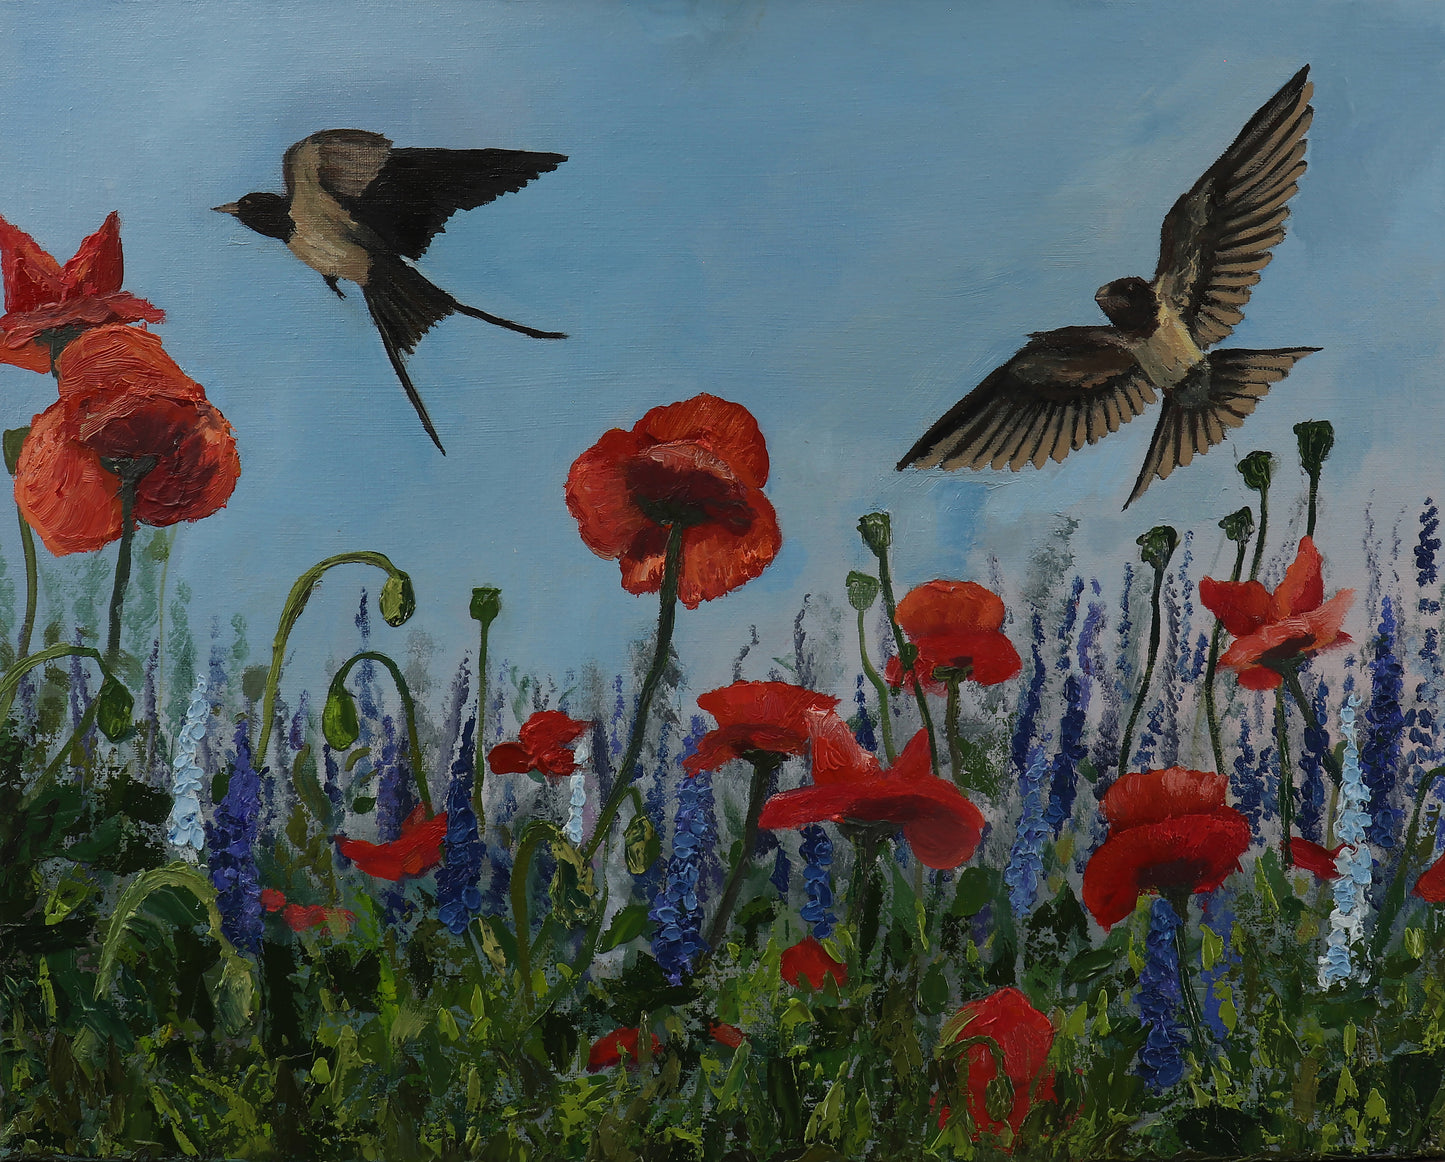 Original painting of left canvas of two birds flying among poppy fields